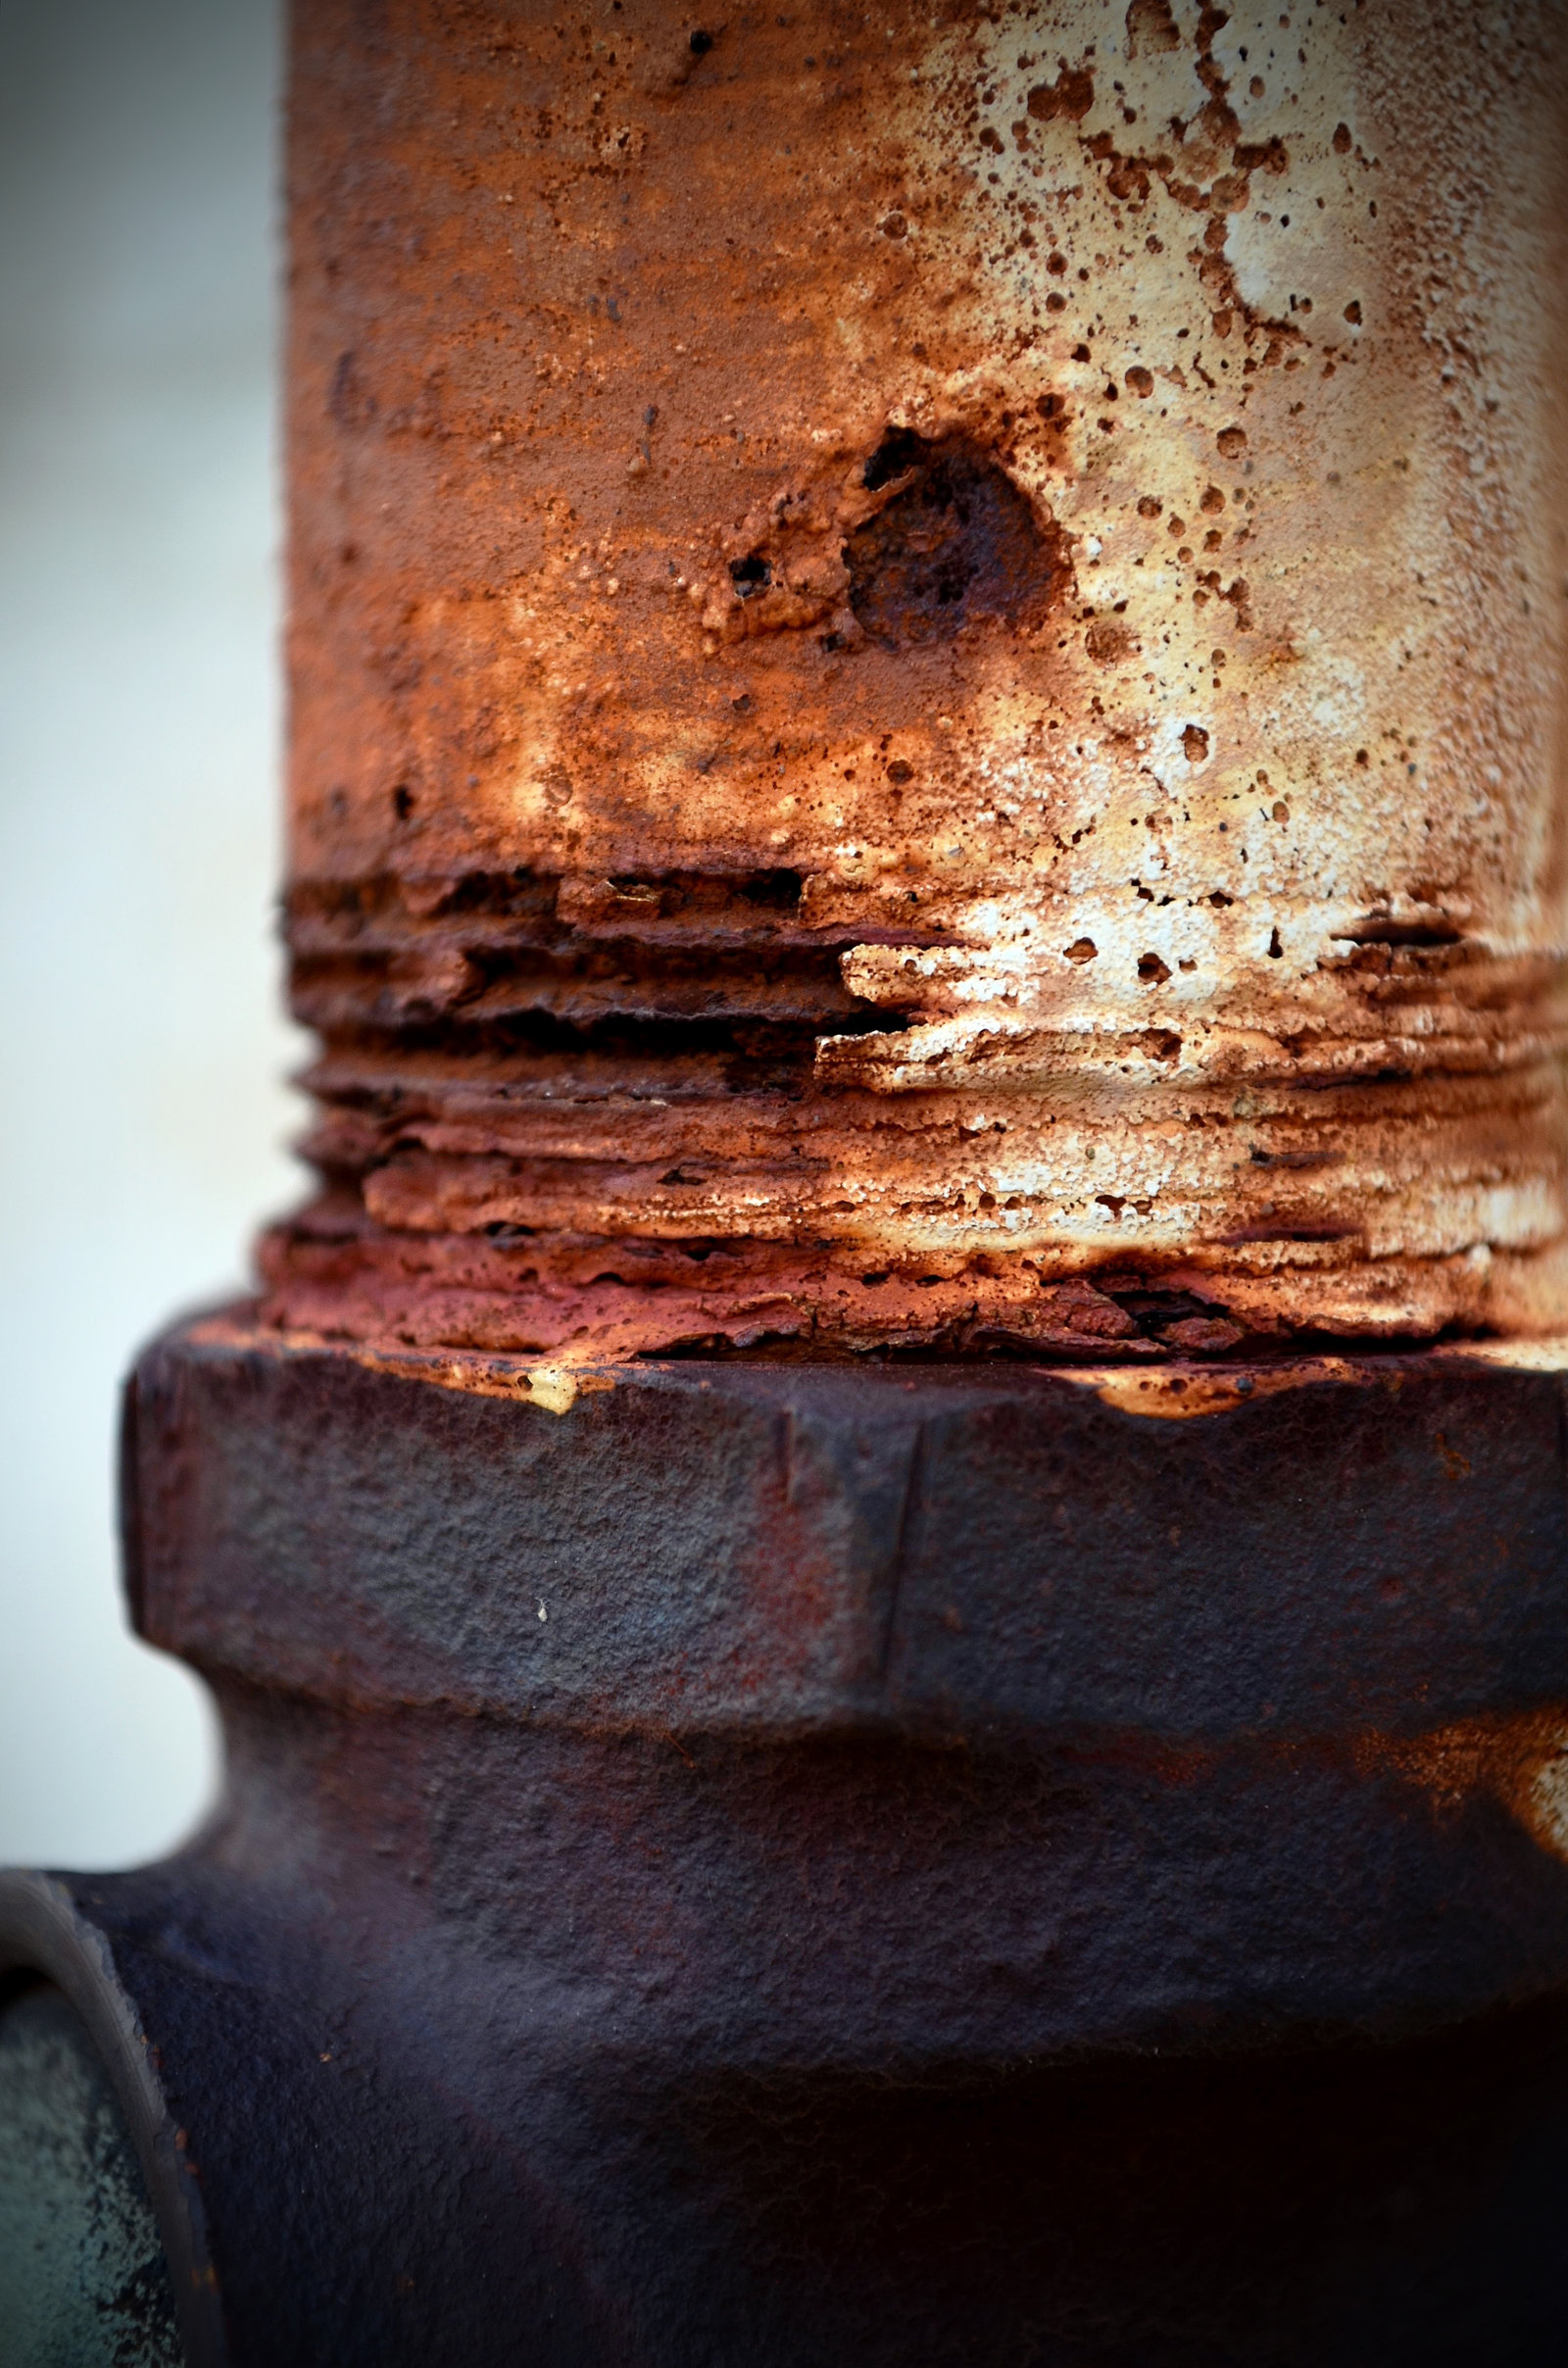 Rusted Pipe at The Industrial complex by PAlisauskas on DeviantArt